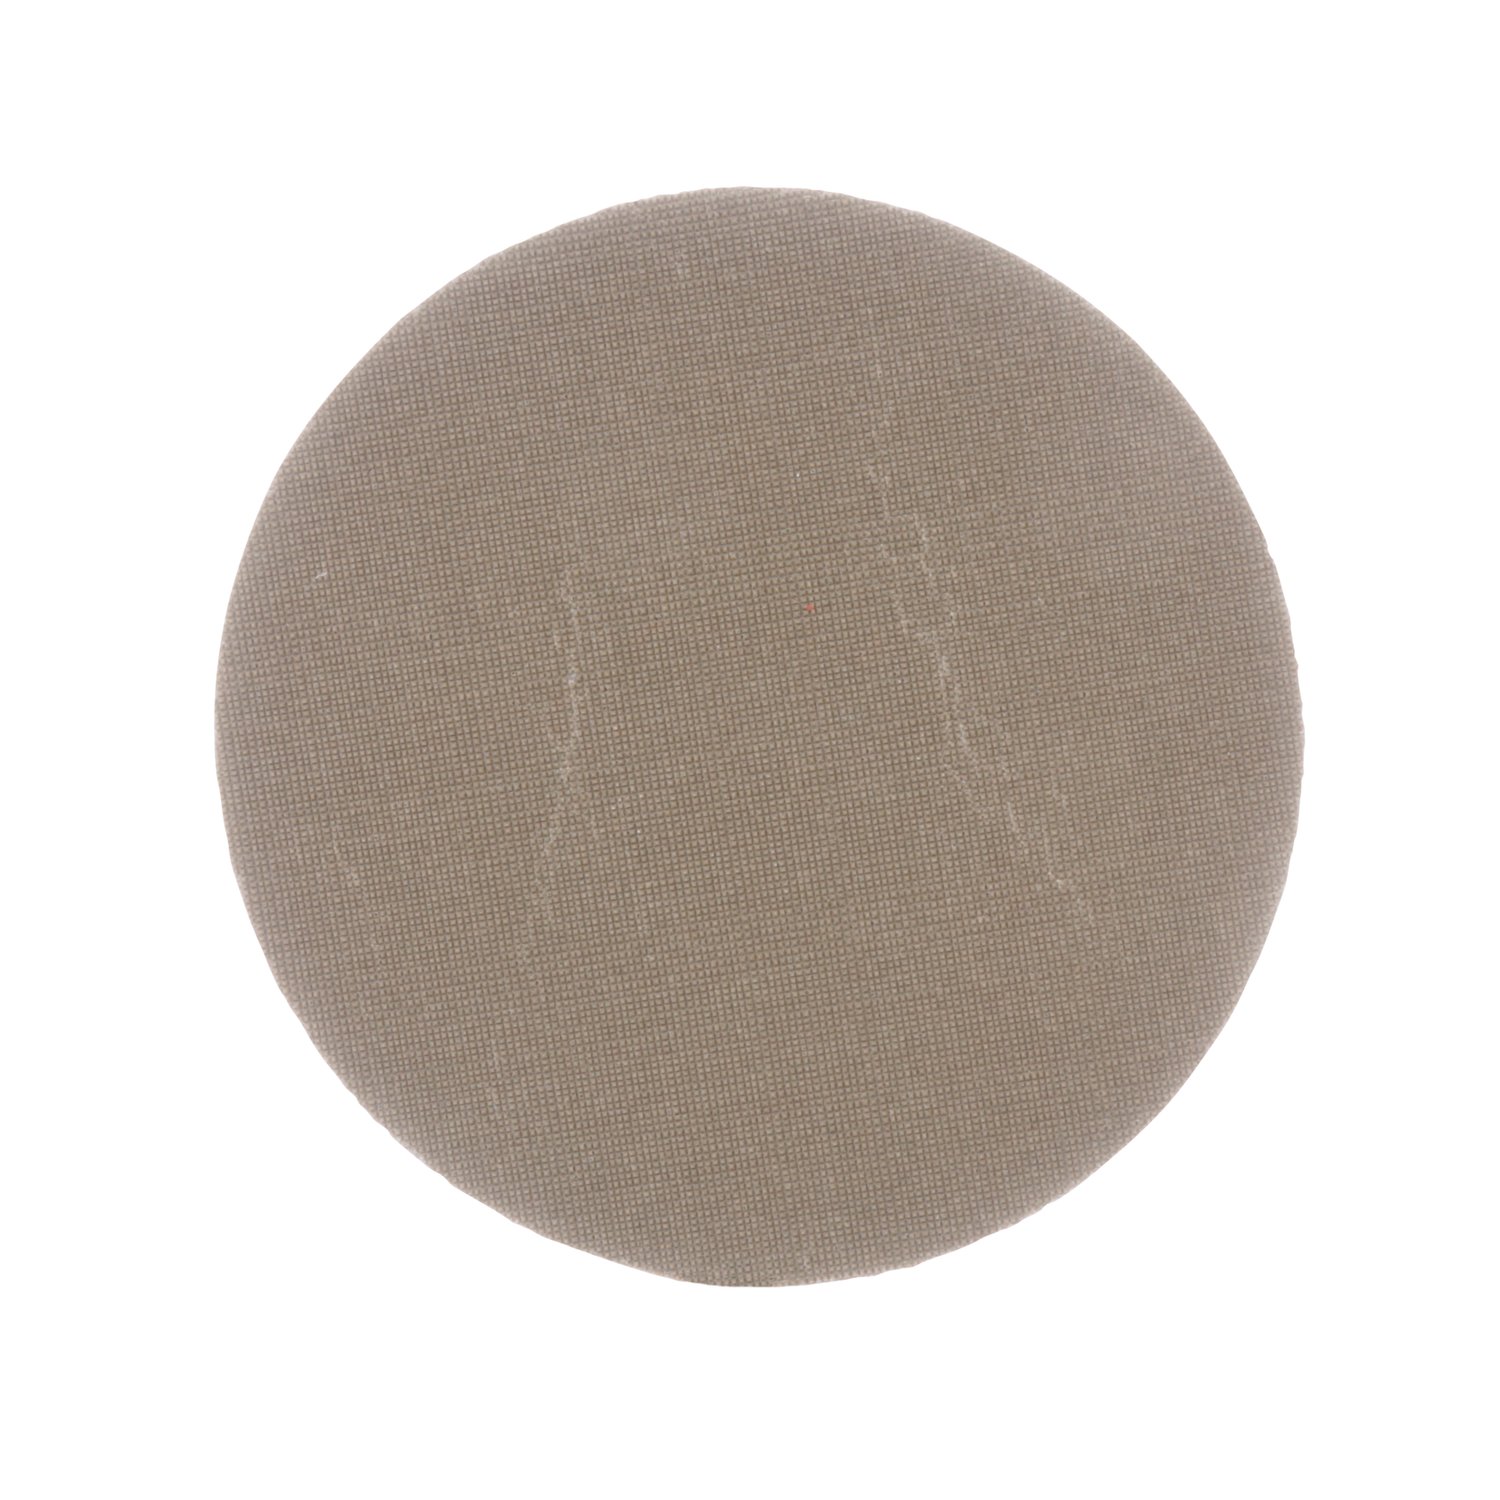 7010518488 - 3M Trizact PSA Cloth Disc 237AA, A65 X-weight, 2-1/2 in x NH, Die
250BB